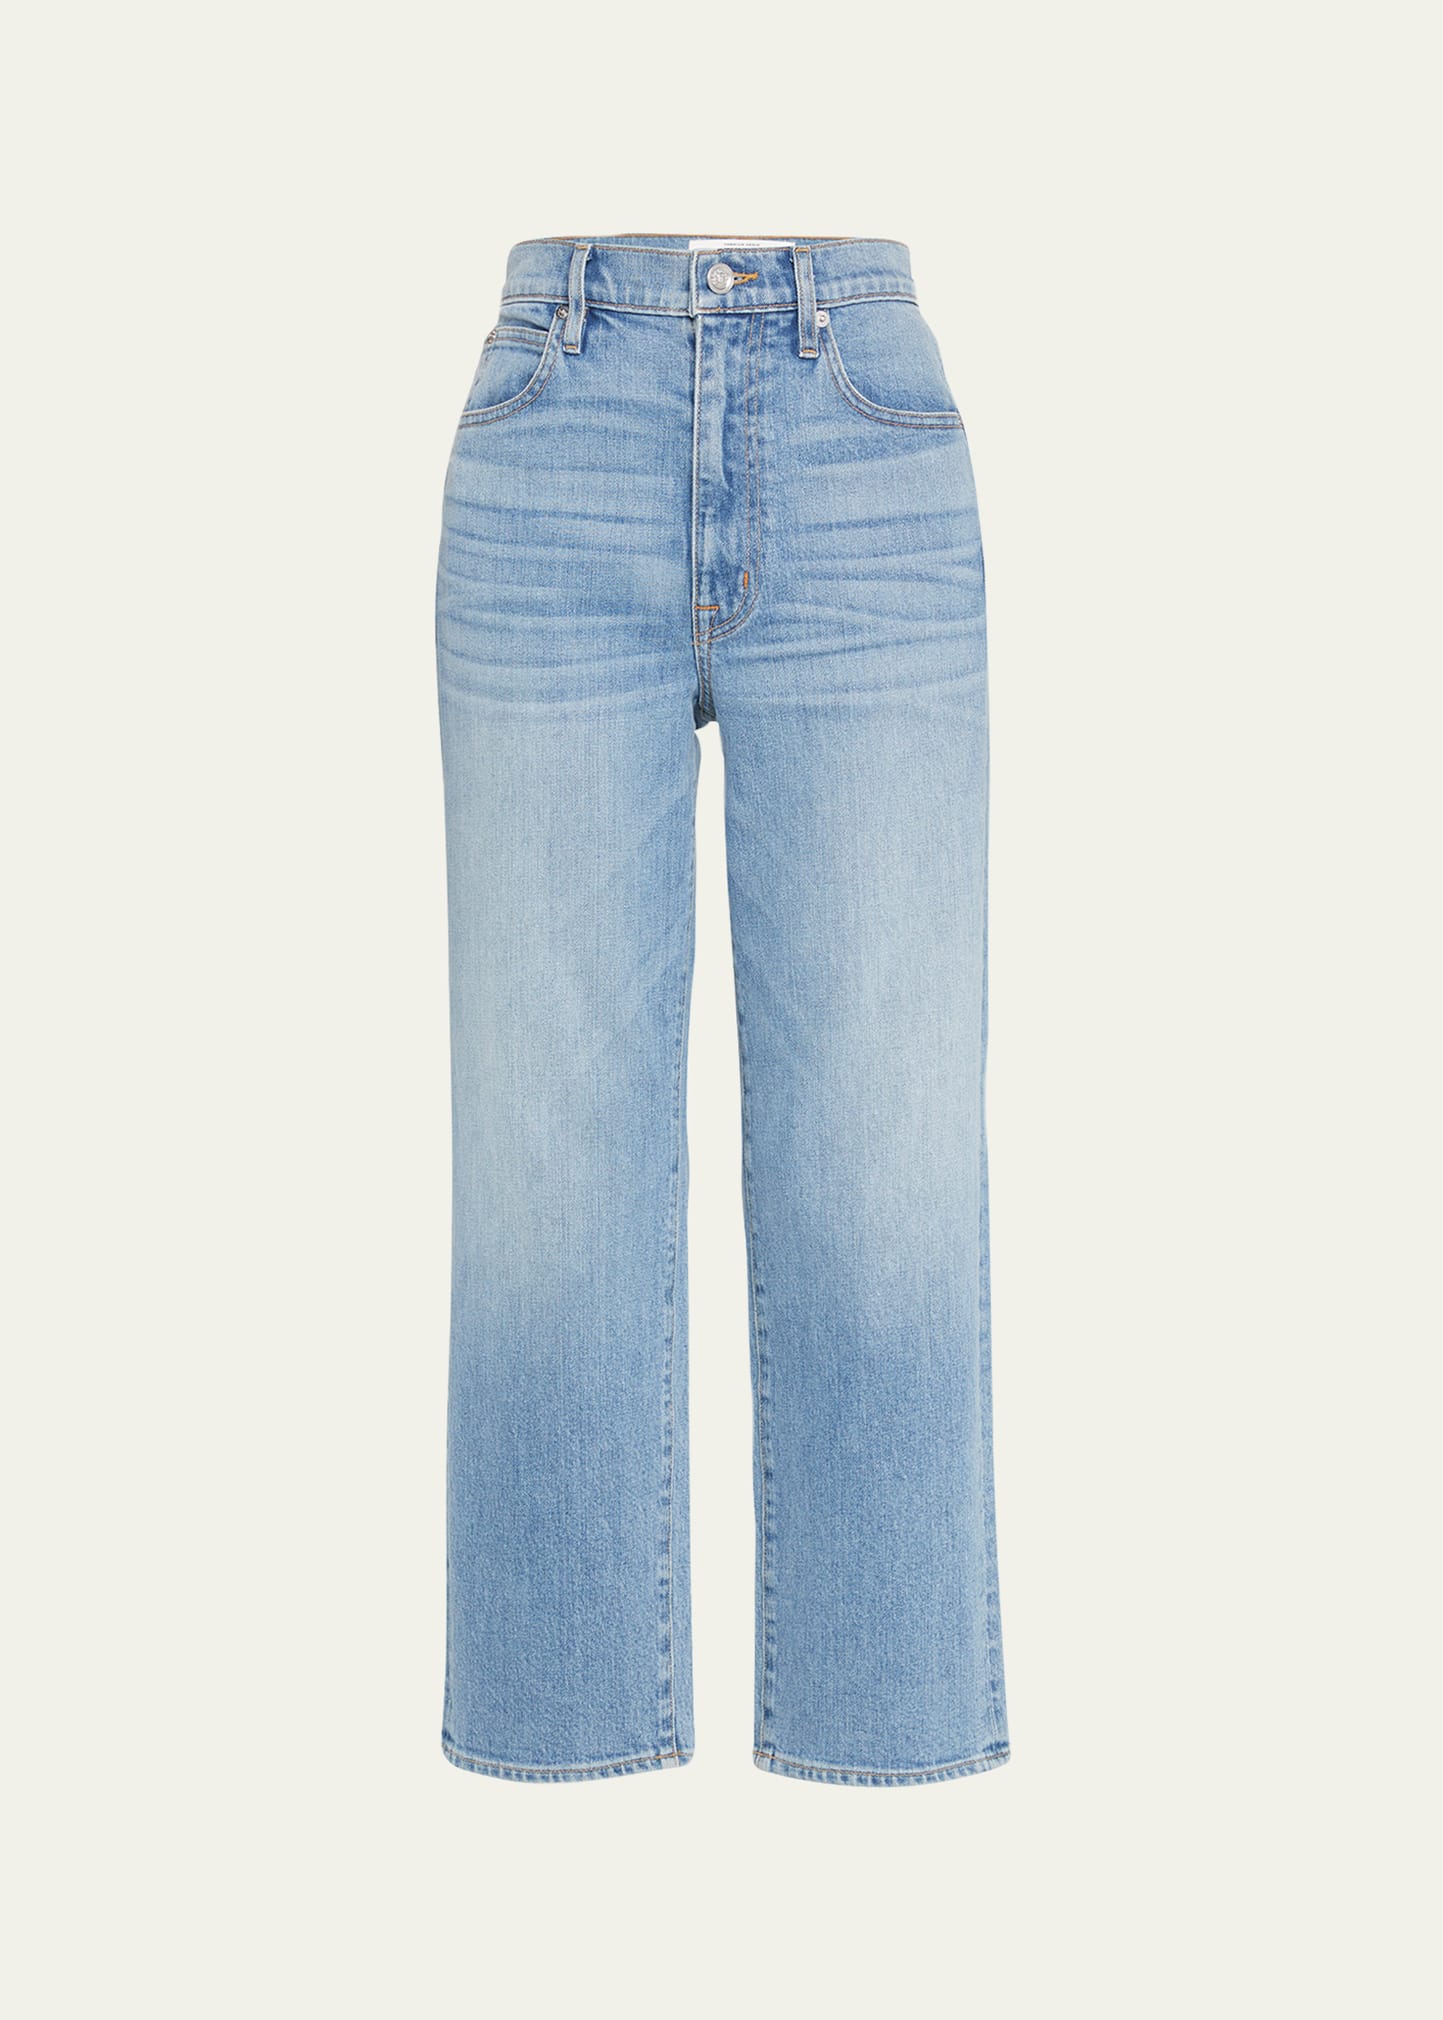 London Cropped Jeans